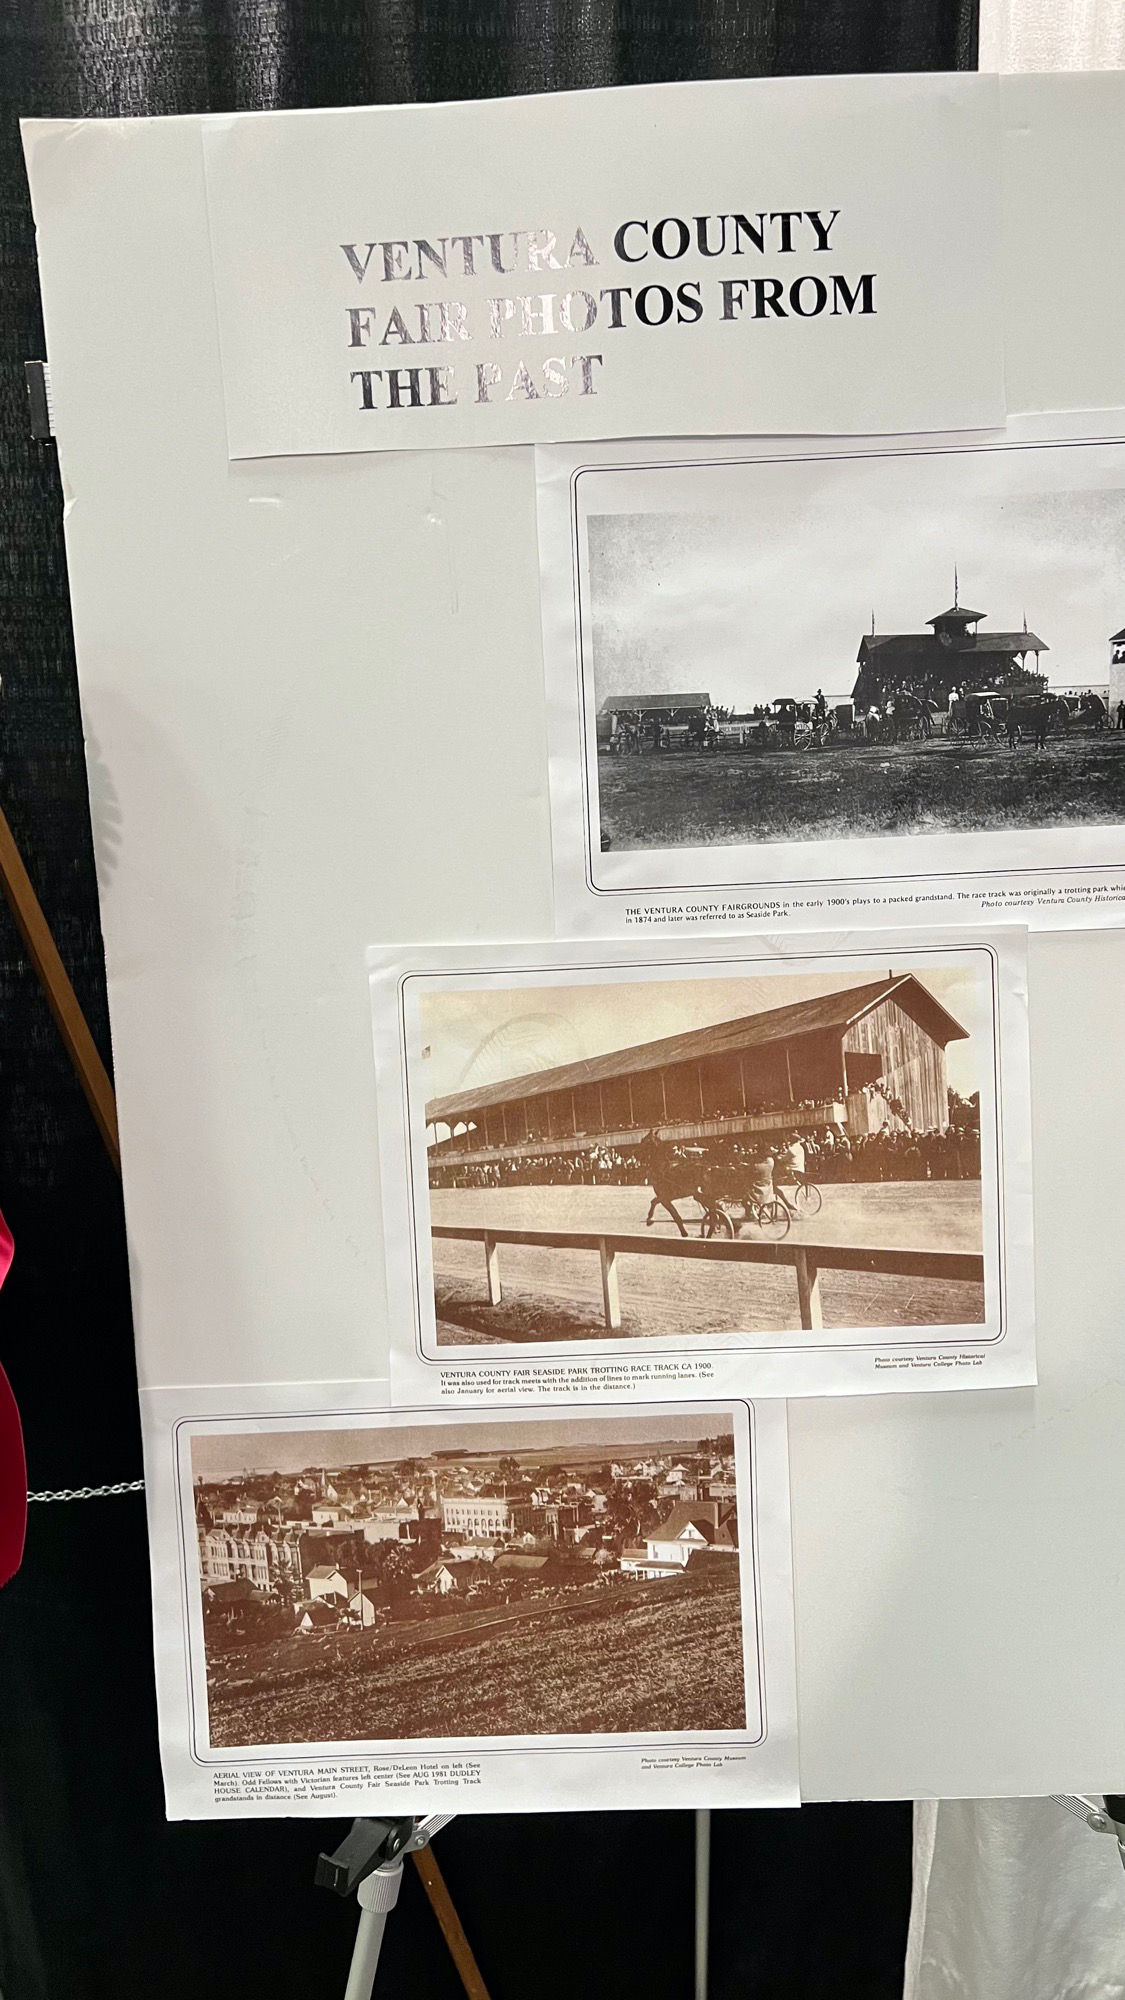 Ventura County Fair Photos from the Past